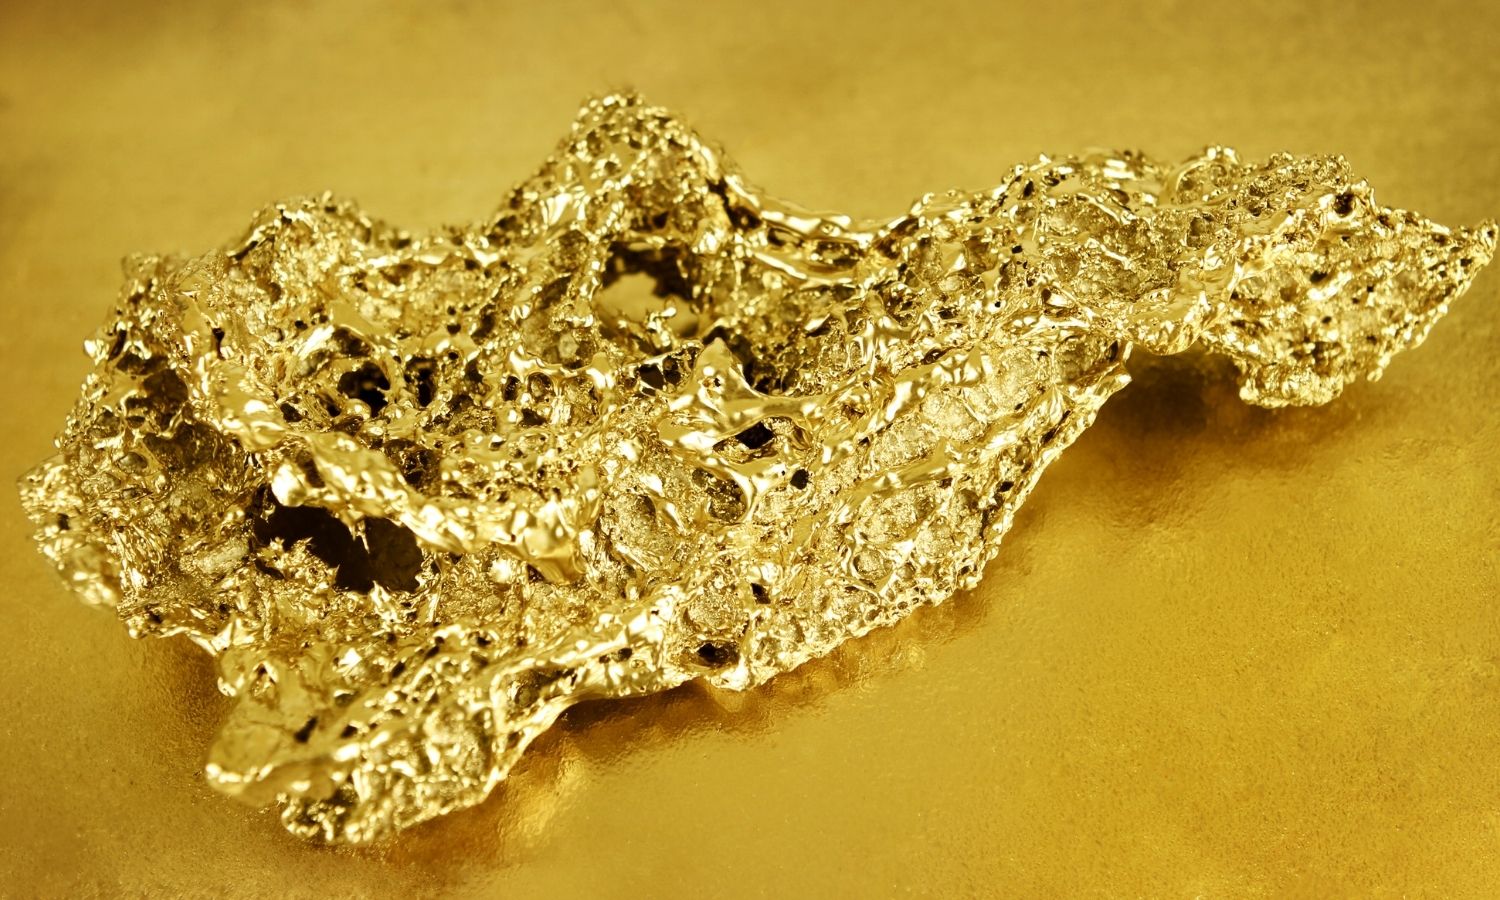 OTD in 1869: The world's largest golden nugget was discovered.